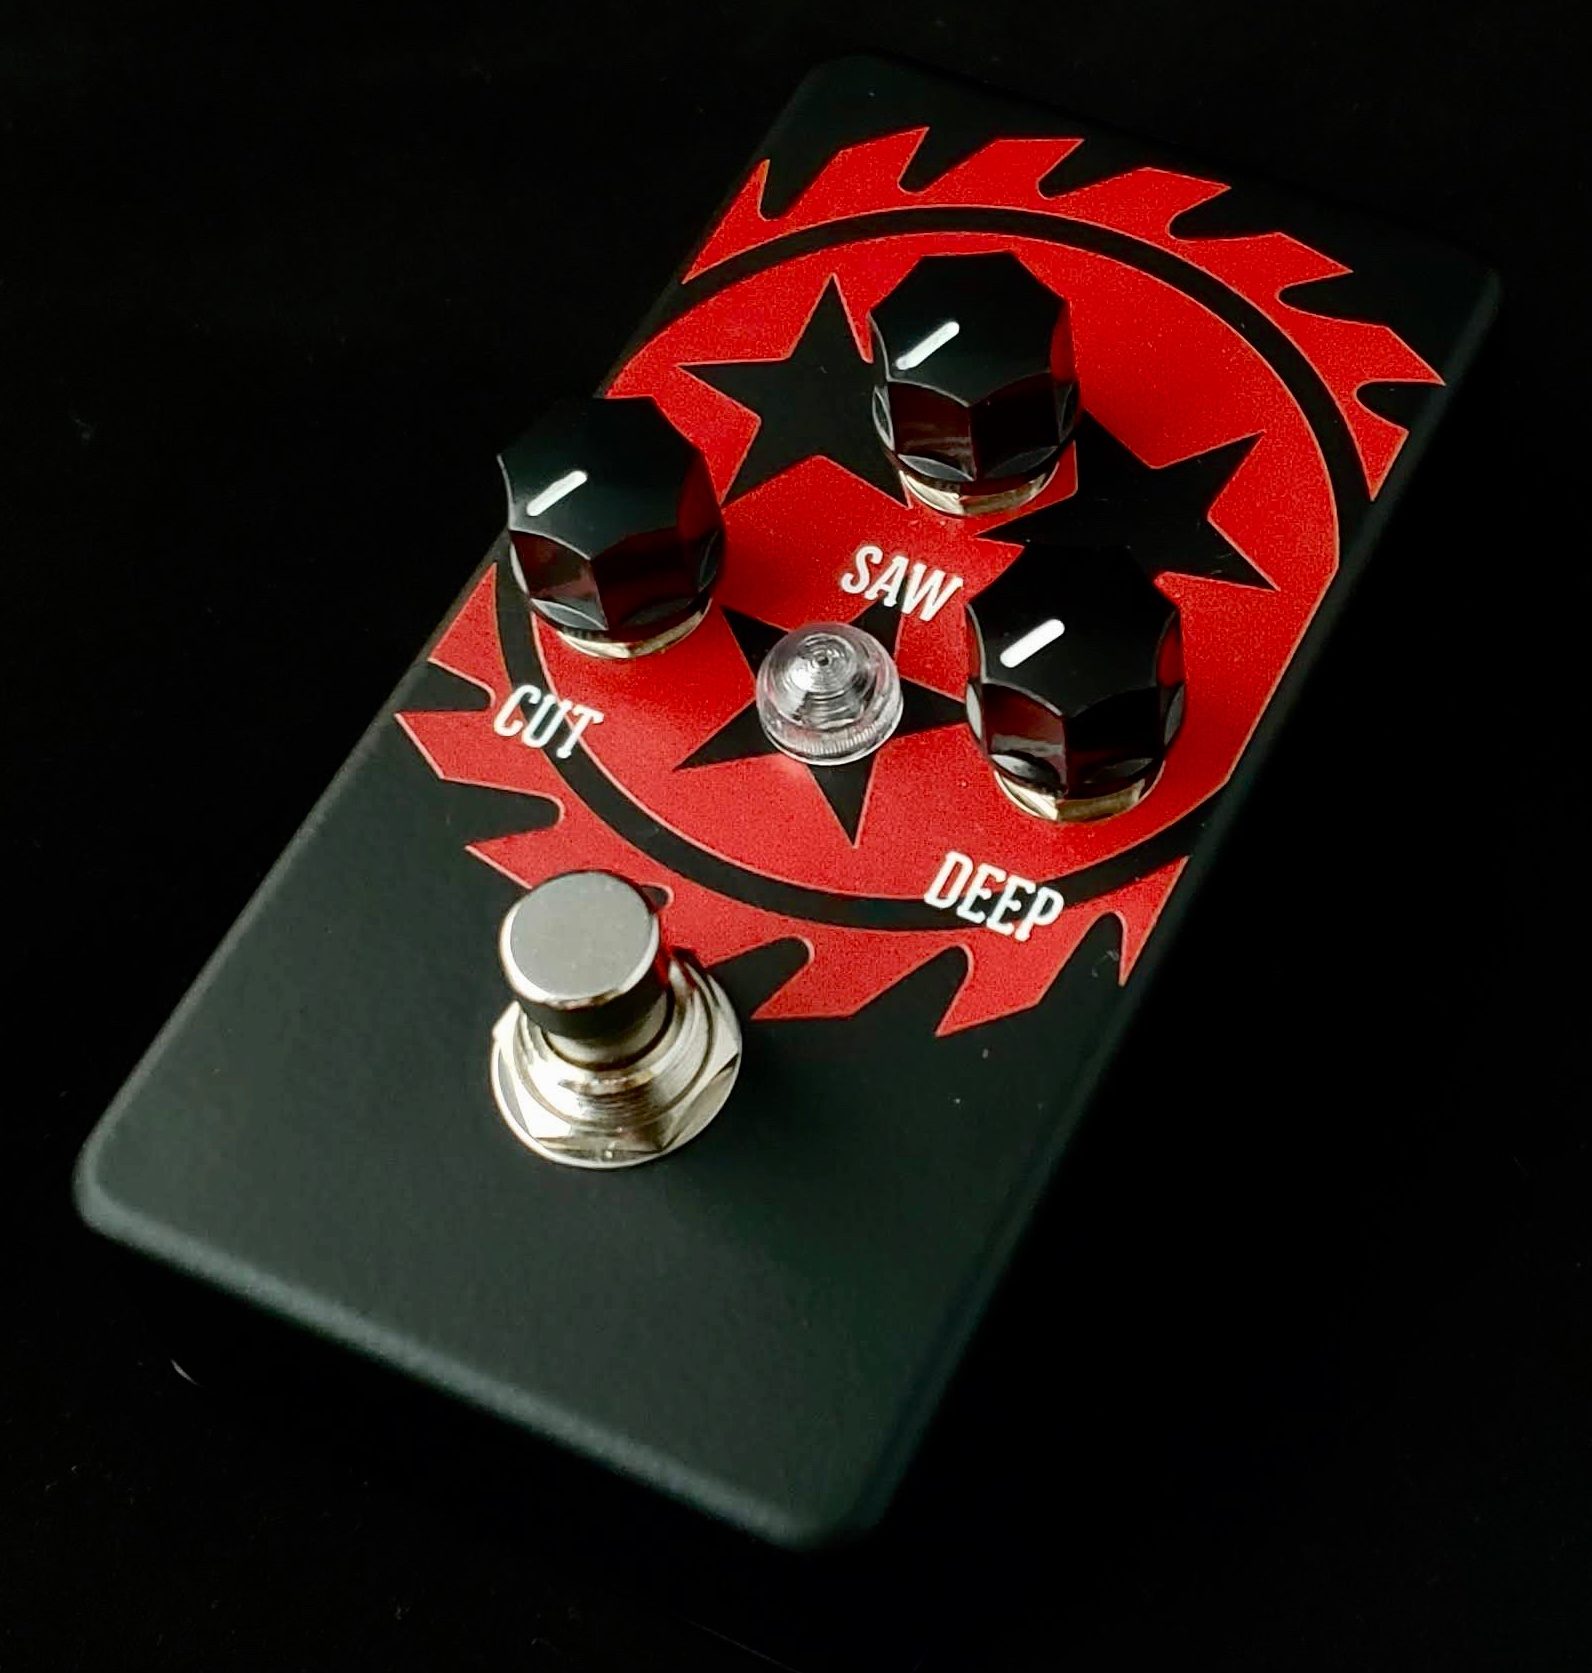 Fortin Amps Whitechapel Blade Boost Signature Pedal - PÉdale Volume / Boost. / Expression - Variation 2